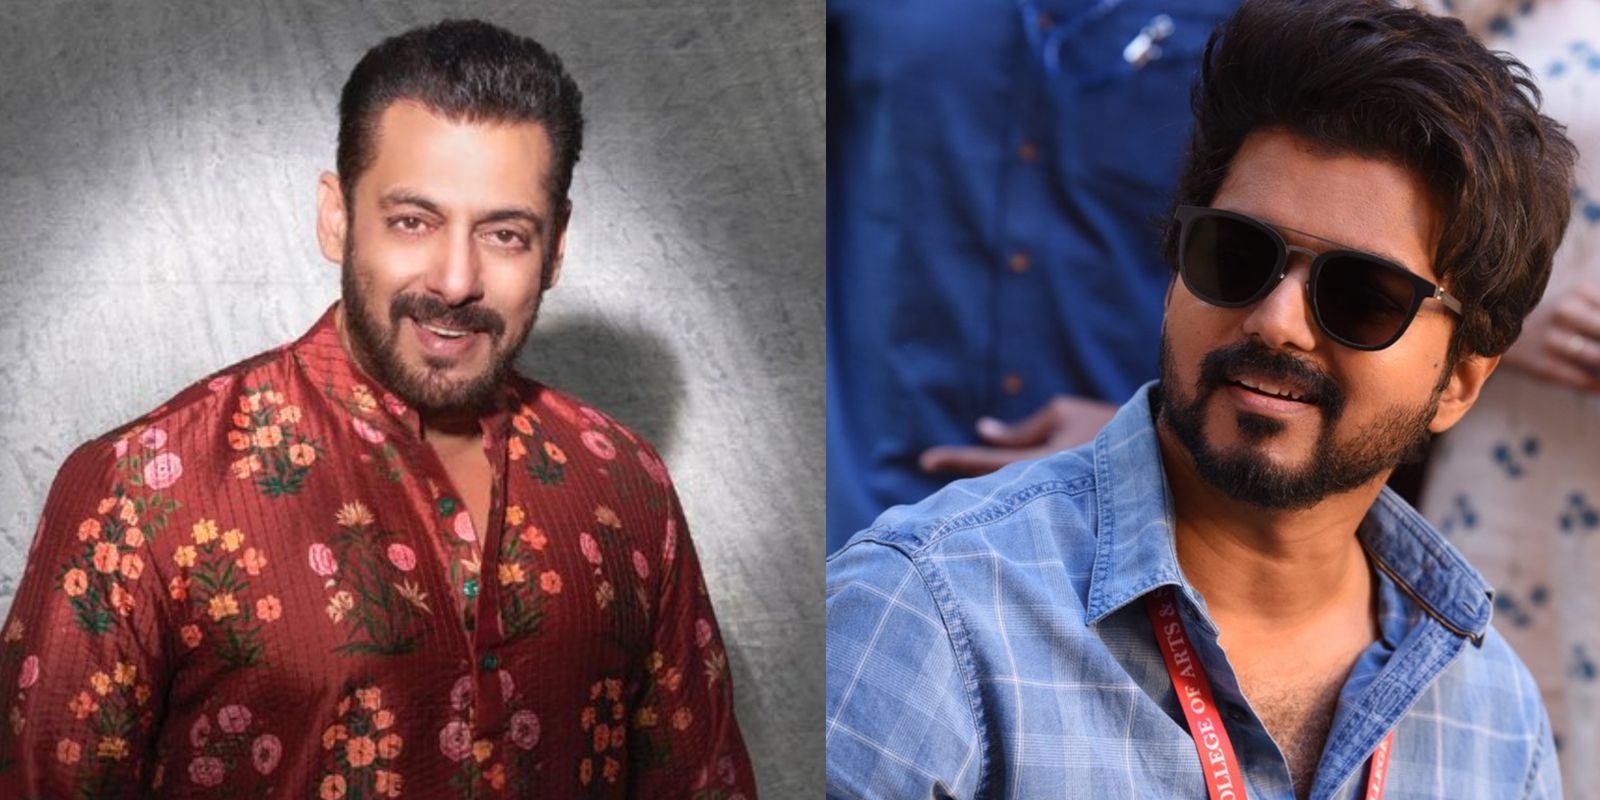 Salman Khan To Fill Thalapathy Vijay's Shoes In The Hindi Remake Of Master? Here's What We Know